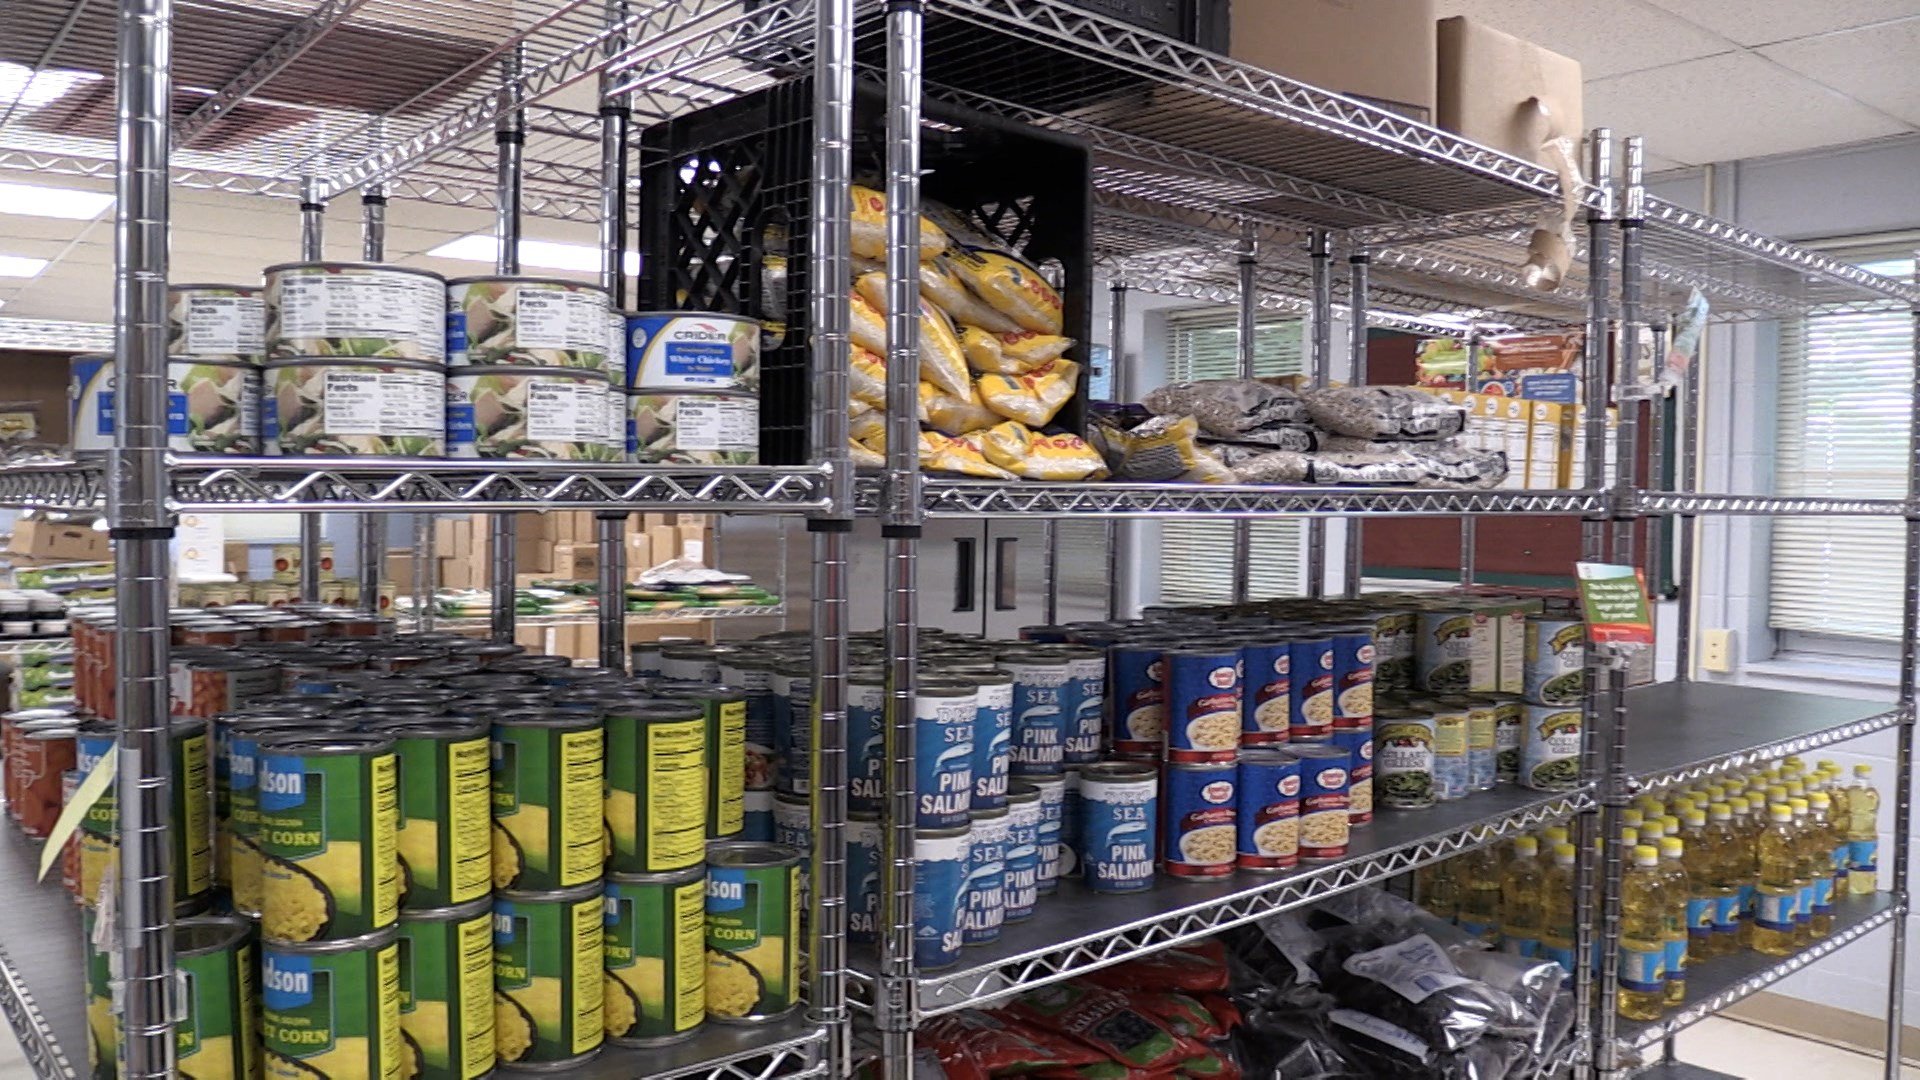 Choice Pantry at Salvation Army Sees Success